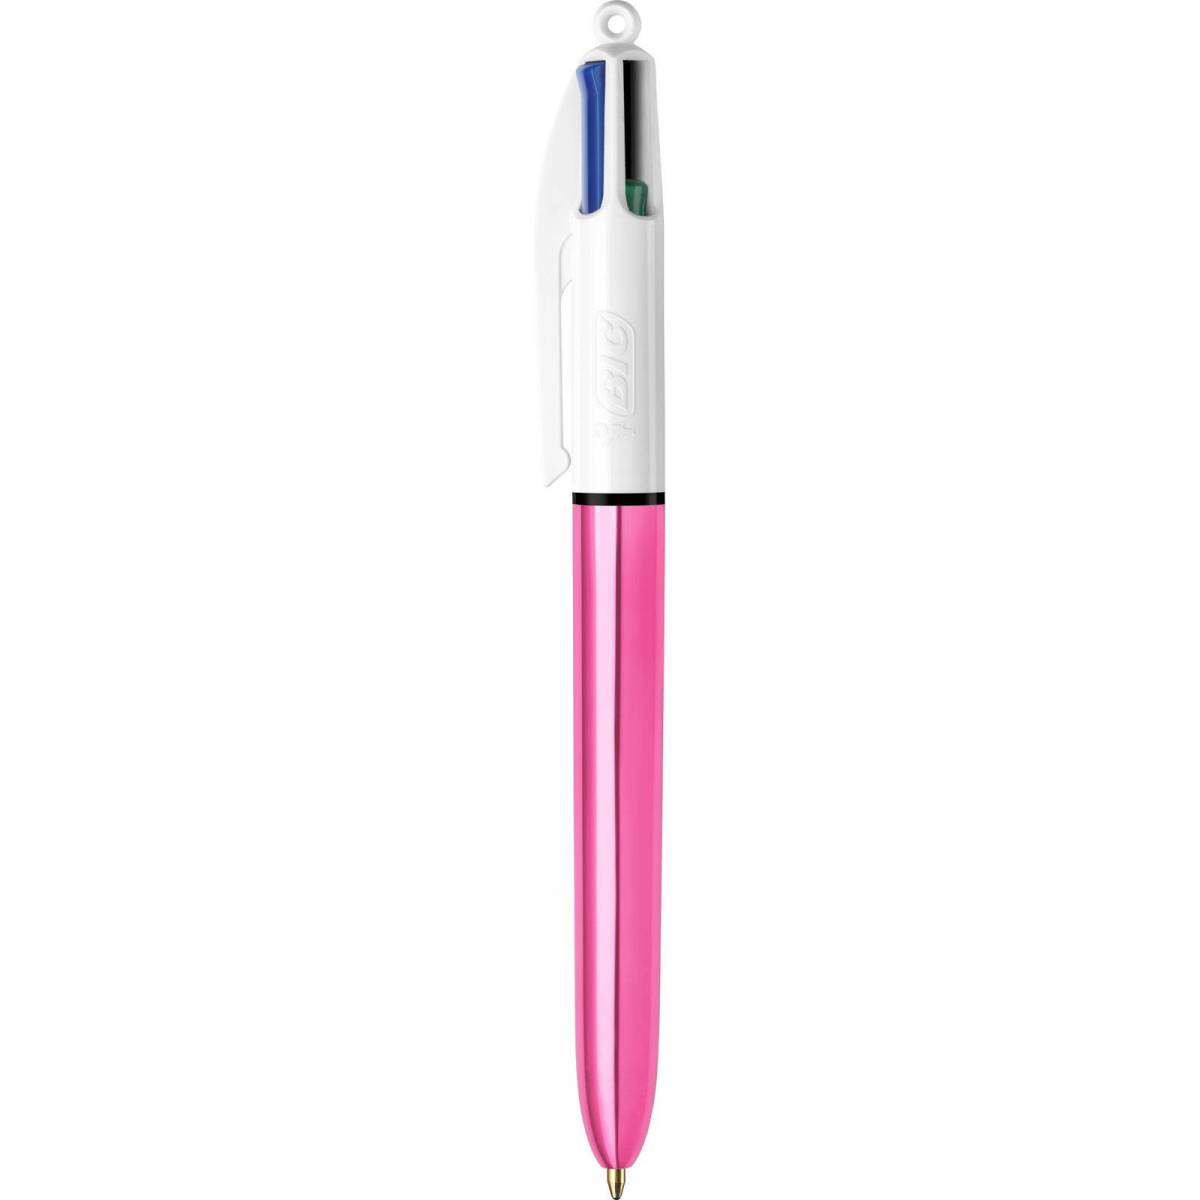 BIC - Stylo 4 Couleurs Shine Rose